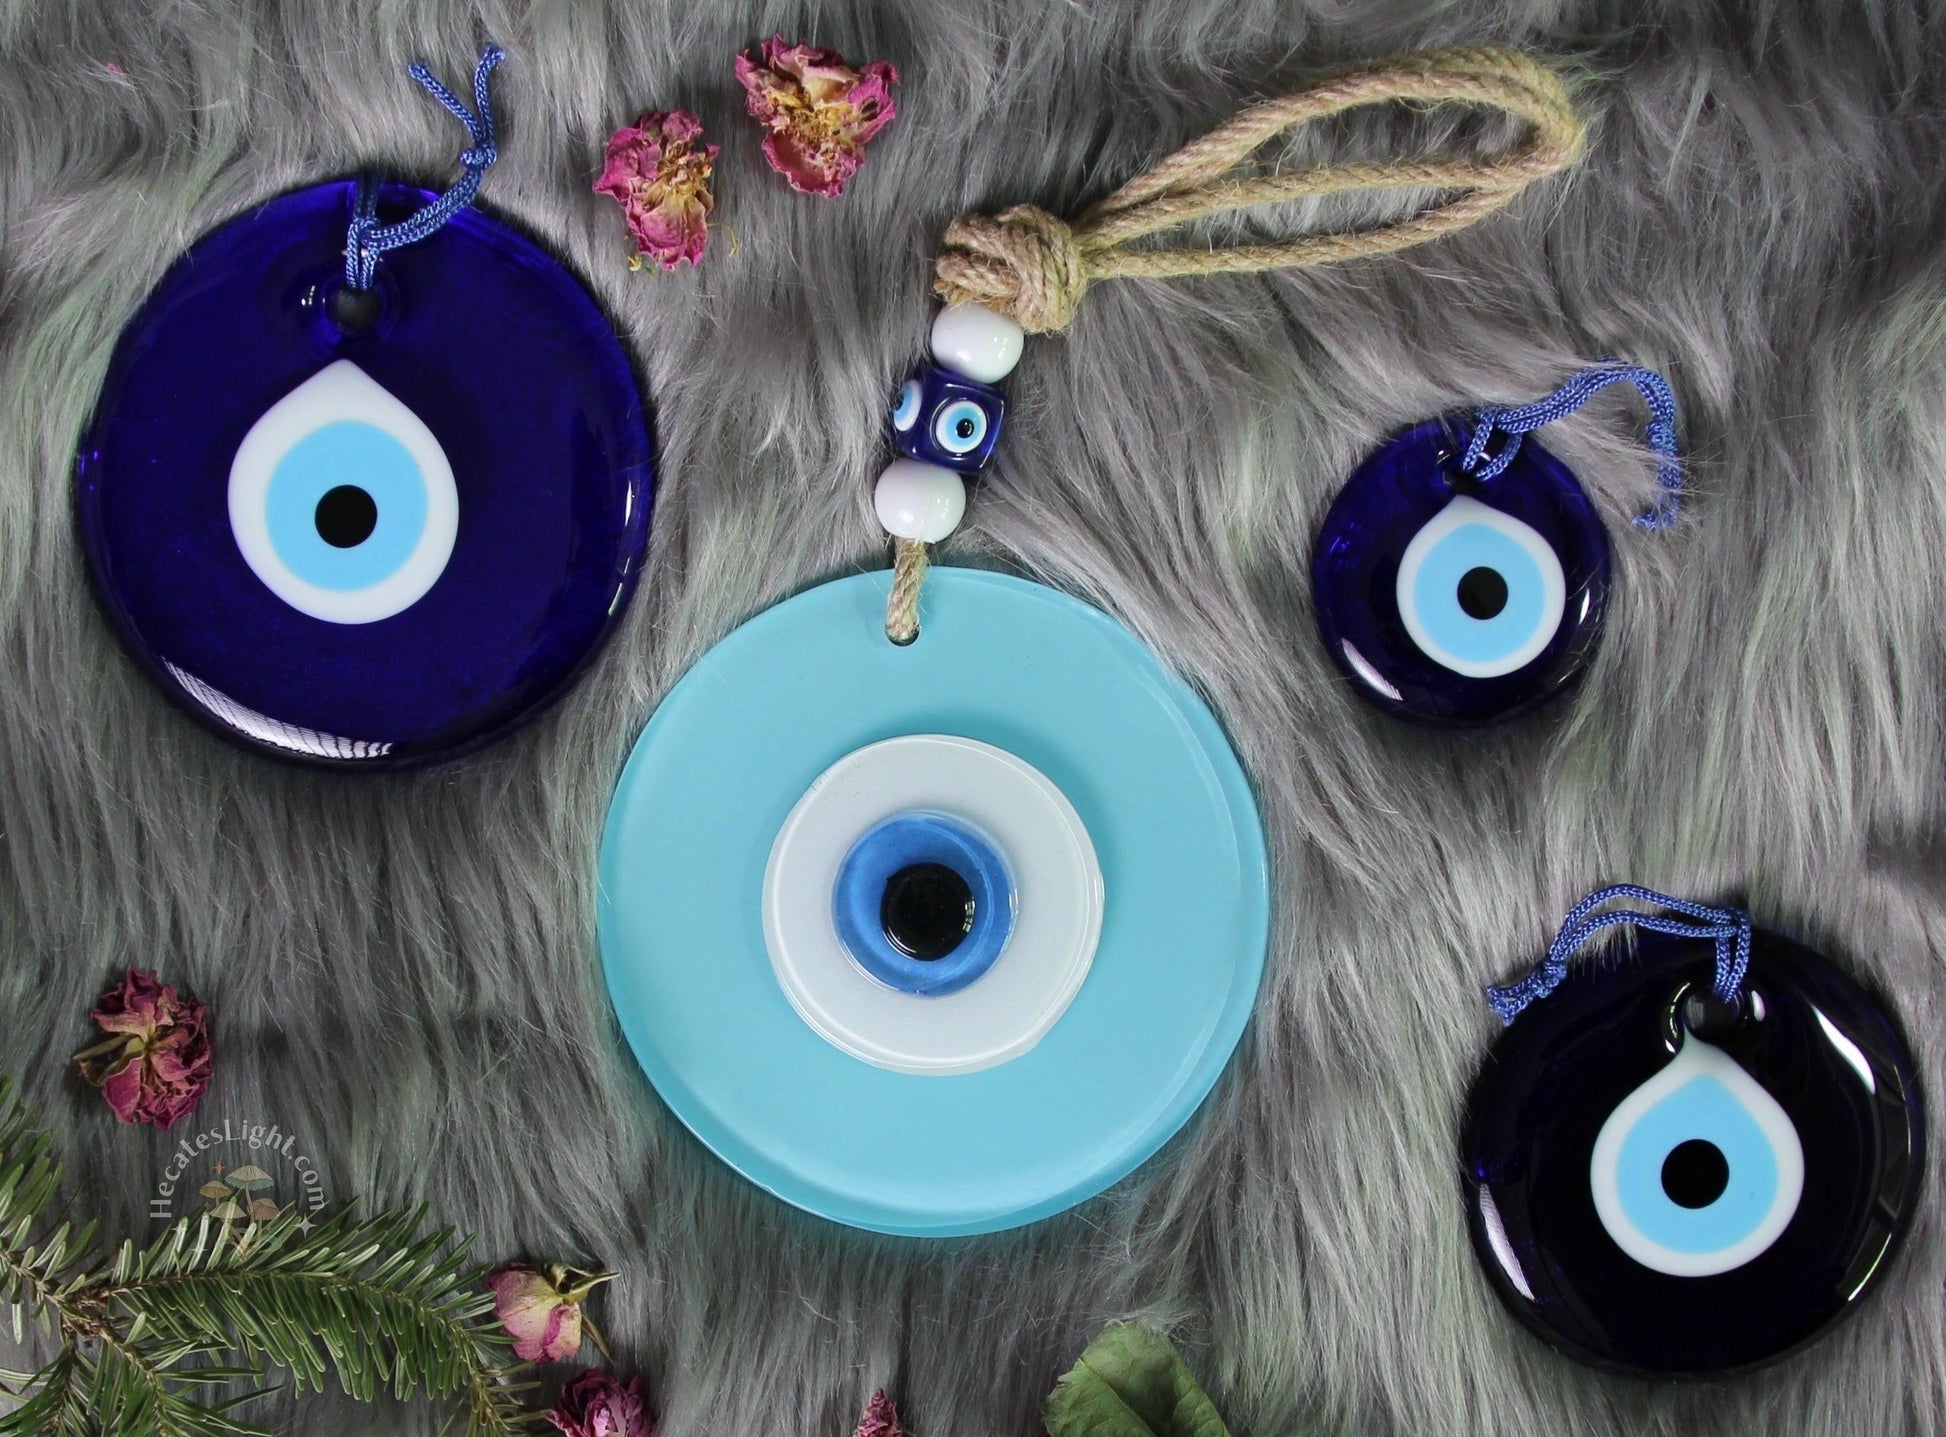 Evil Eye Charm | Glass Amulet Wall Hanging Hecate's Light amulet, charm, evil eye, talisman Evil Eye Charm | Glass Amulet Wall Hanging Hecate's Light amulet, charm, evil eye, talisman metaphysical occult supplies witchy hecateslight.com witchcraft cottagecore witch gifts metaphysical occult supplies witchy hecateslight.com witchcraft cottagecore witch gifts